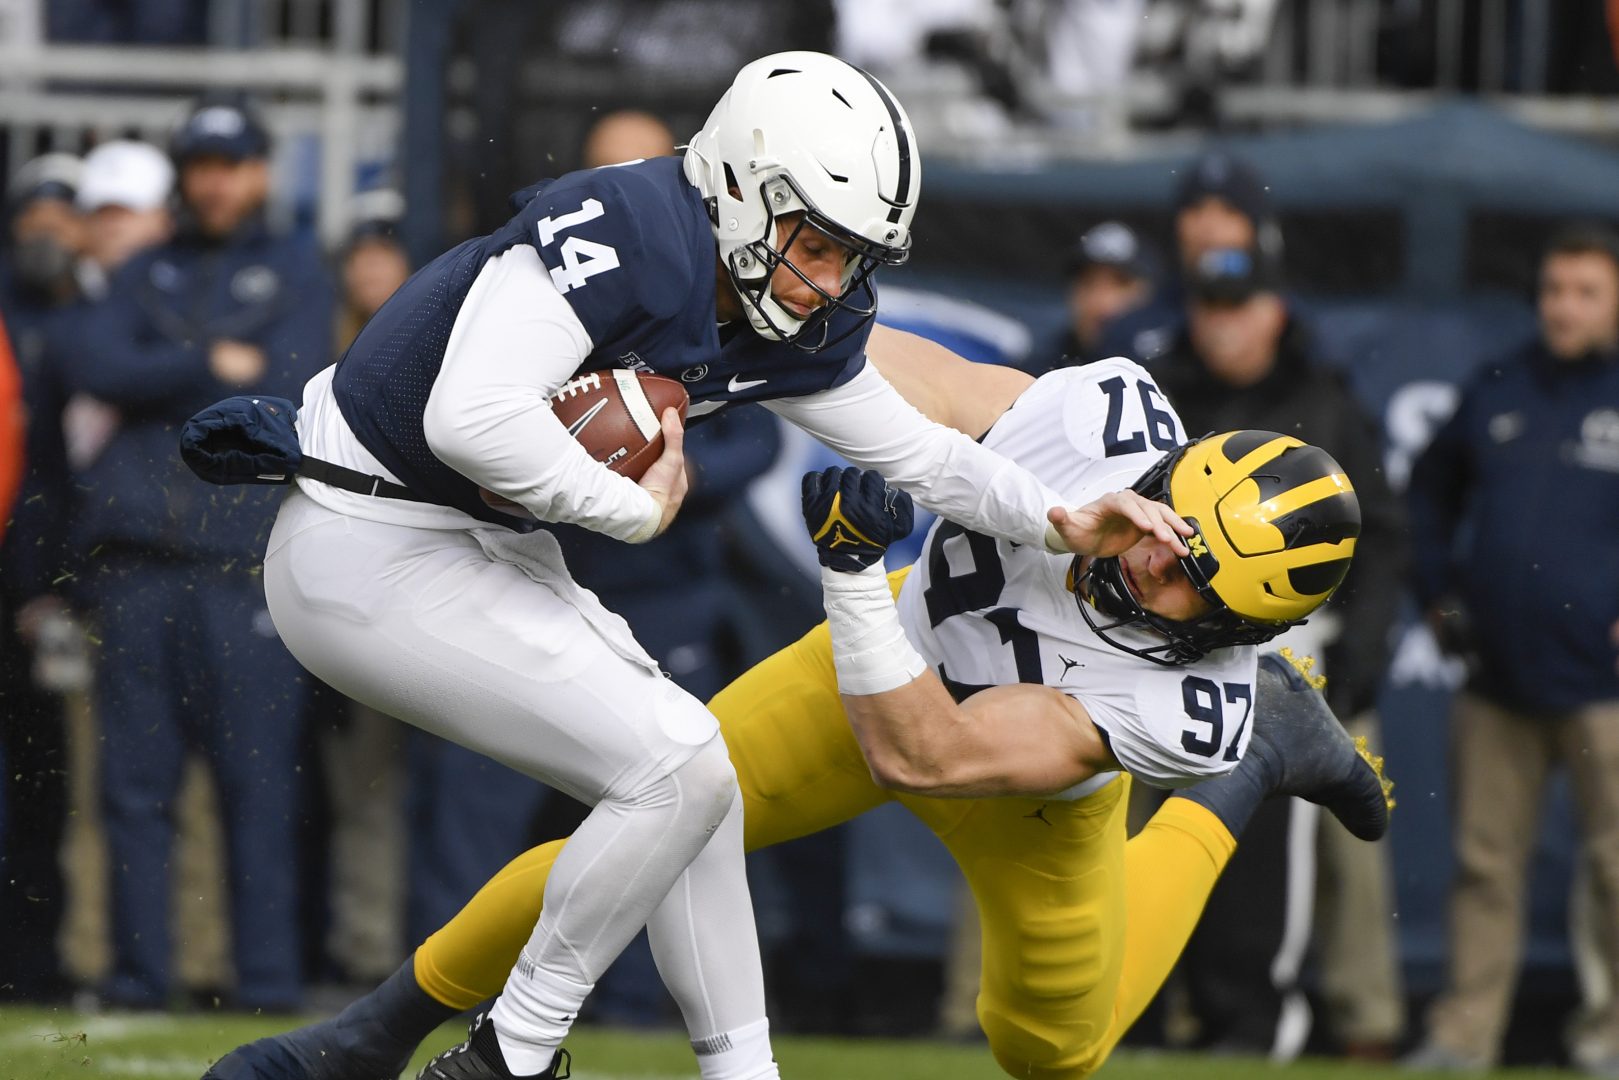 Michigan defensive end Aidan Hutchinson (97) tackles Penn State quarterback Sean Clifford (14) in the first quarter of an NCAA college football game in State College, Pa., Saturday, Nov. 13, 2021. (AP Photo/Barry Reeger)